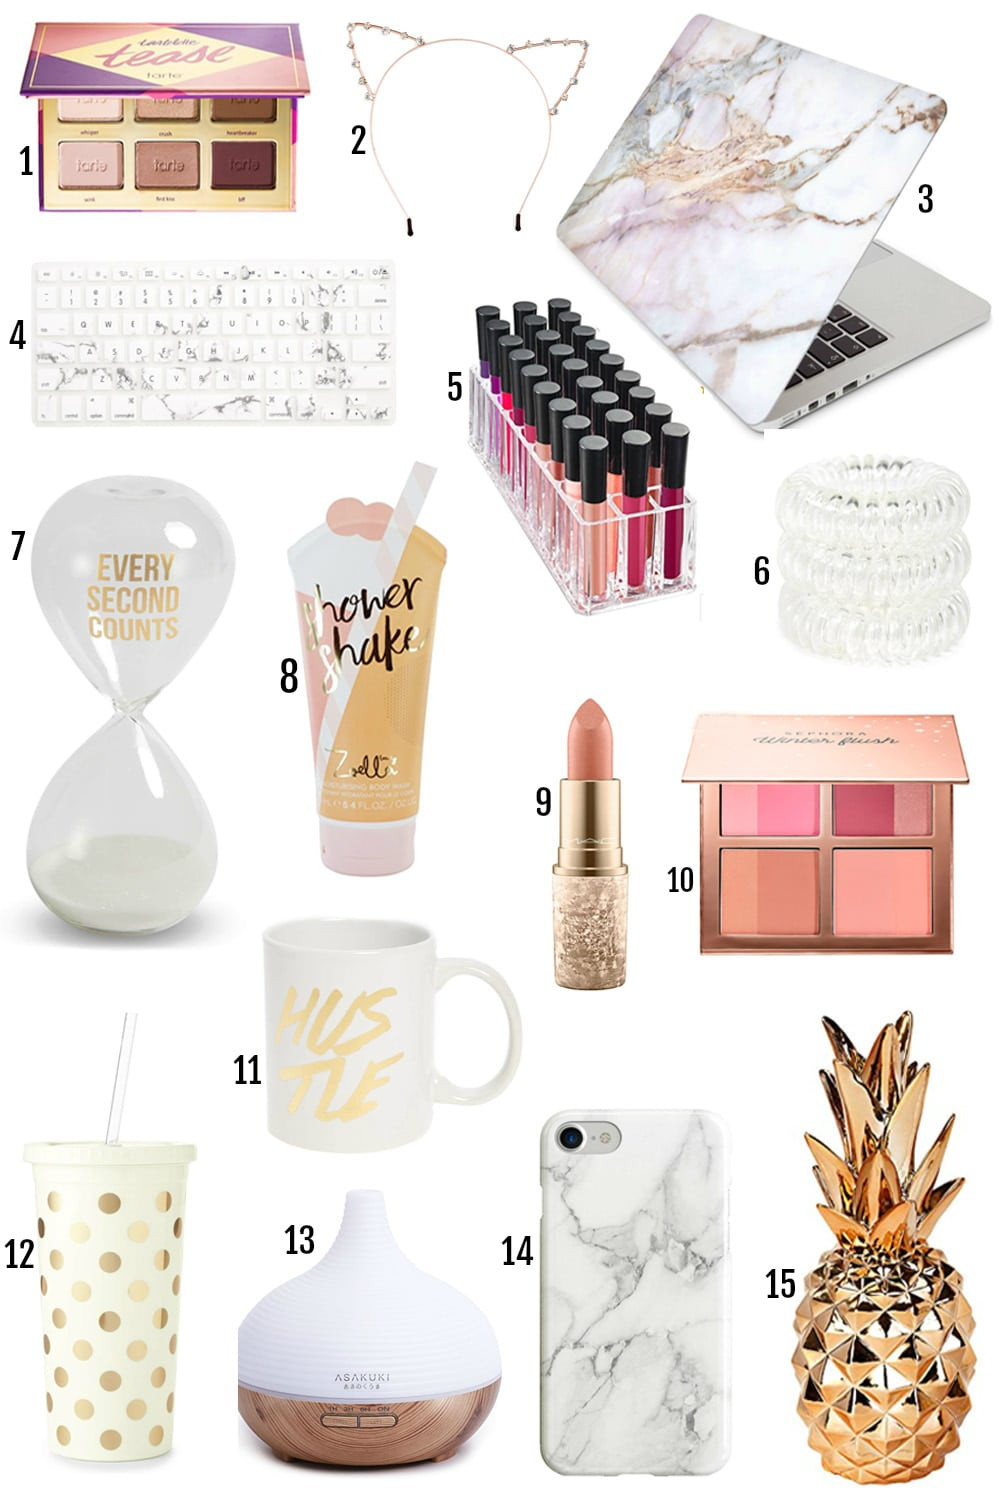 Best Gift Ideas For Her
 The Best Gifts for Her Under $25 Gift Guide